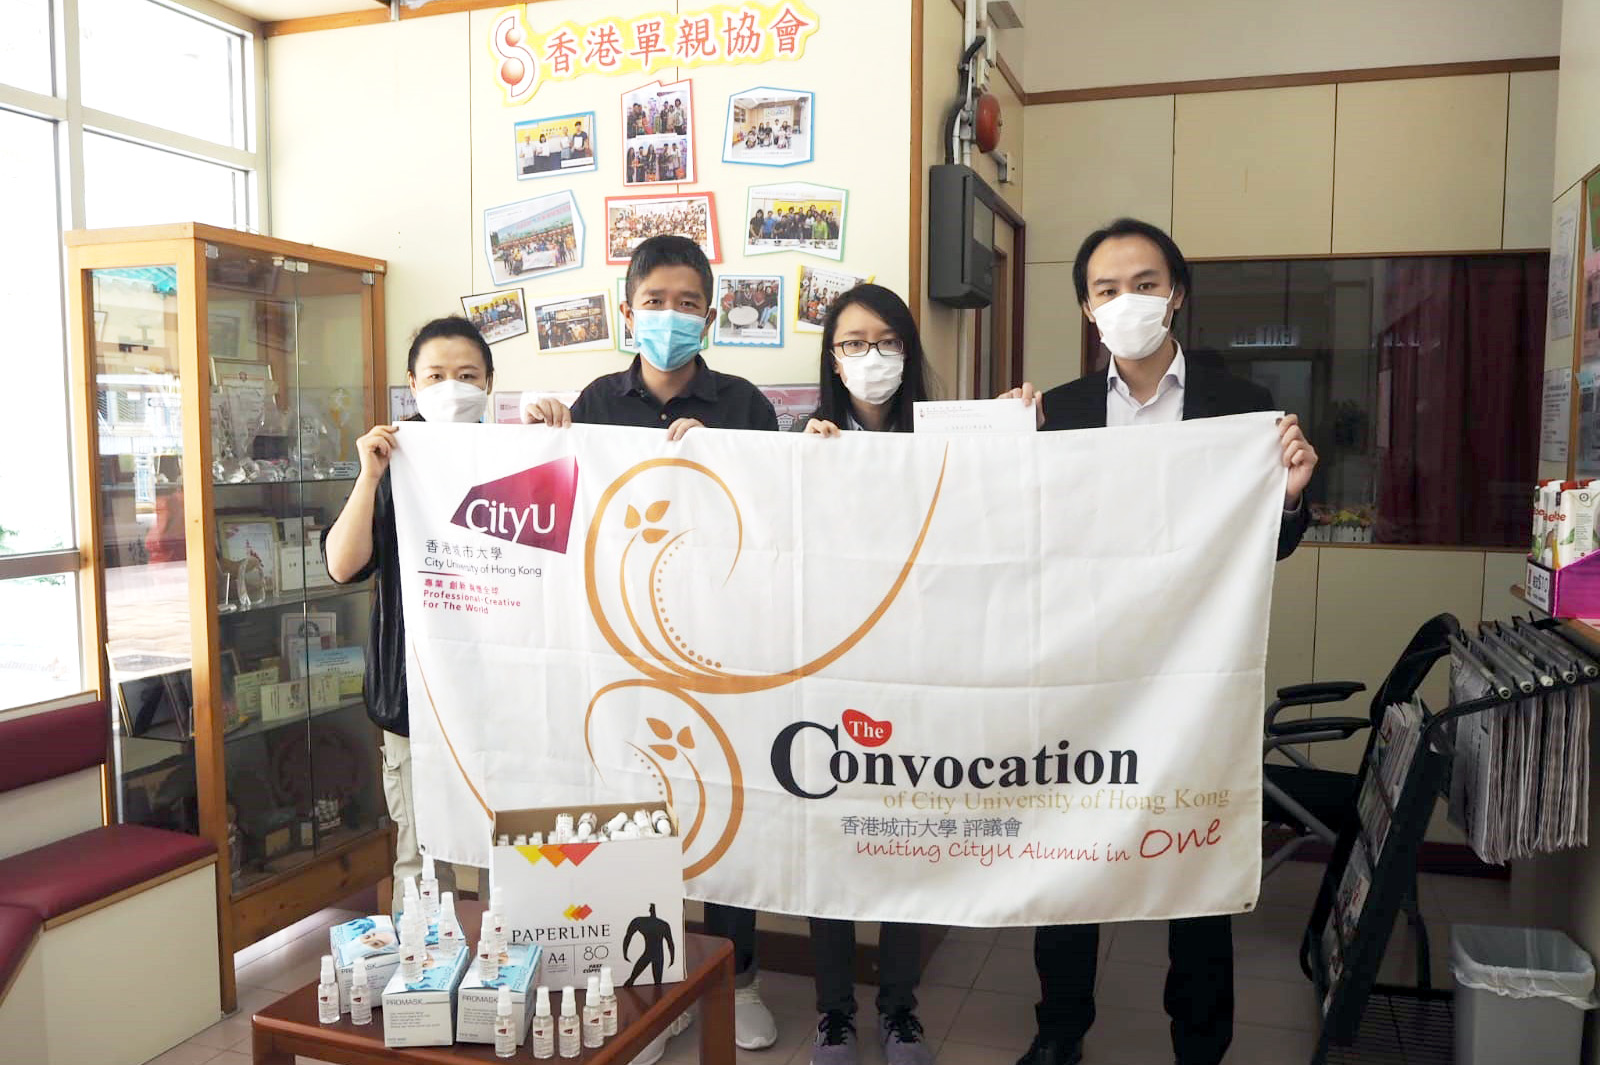 The Convocation presented alcohol handrubs provided by CityU to a beneficiary organisation.